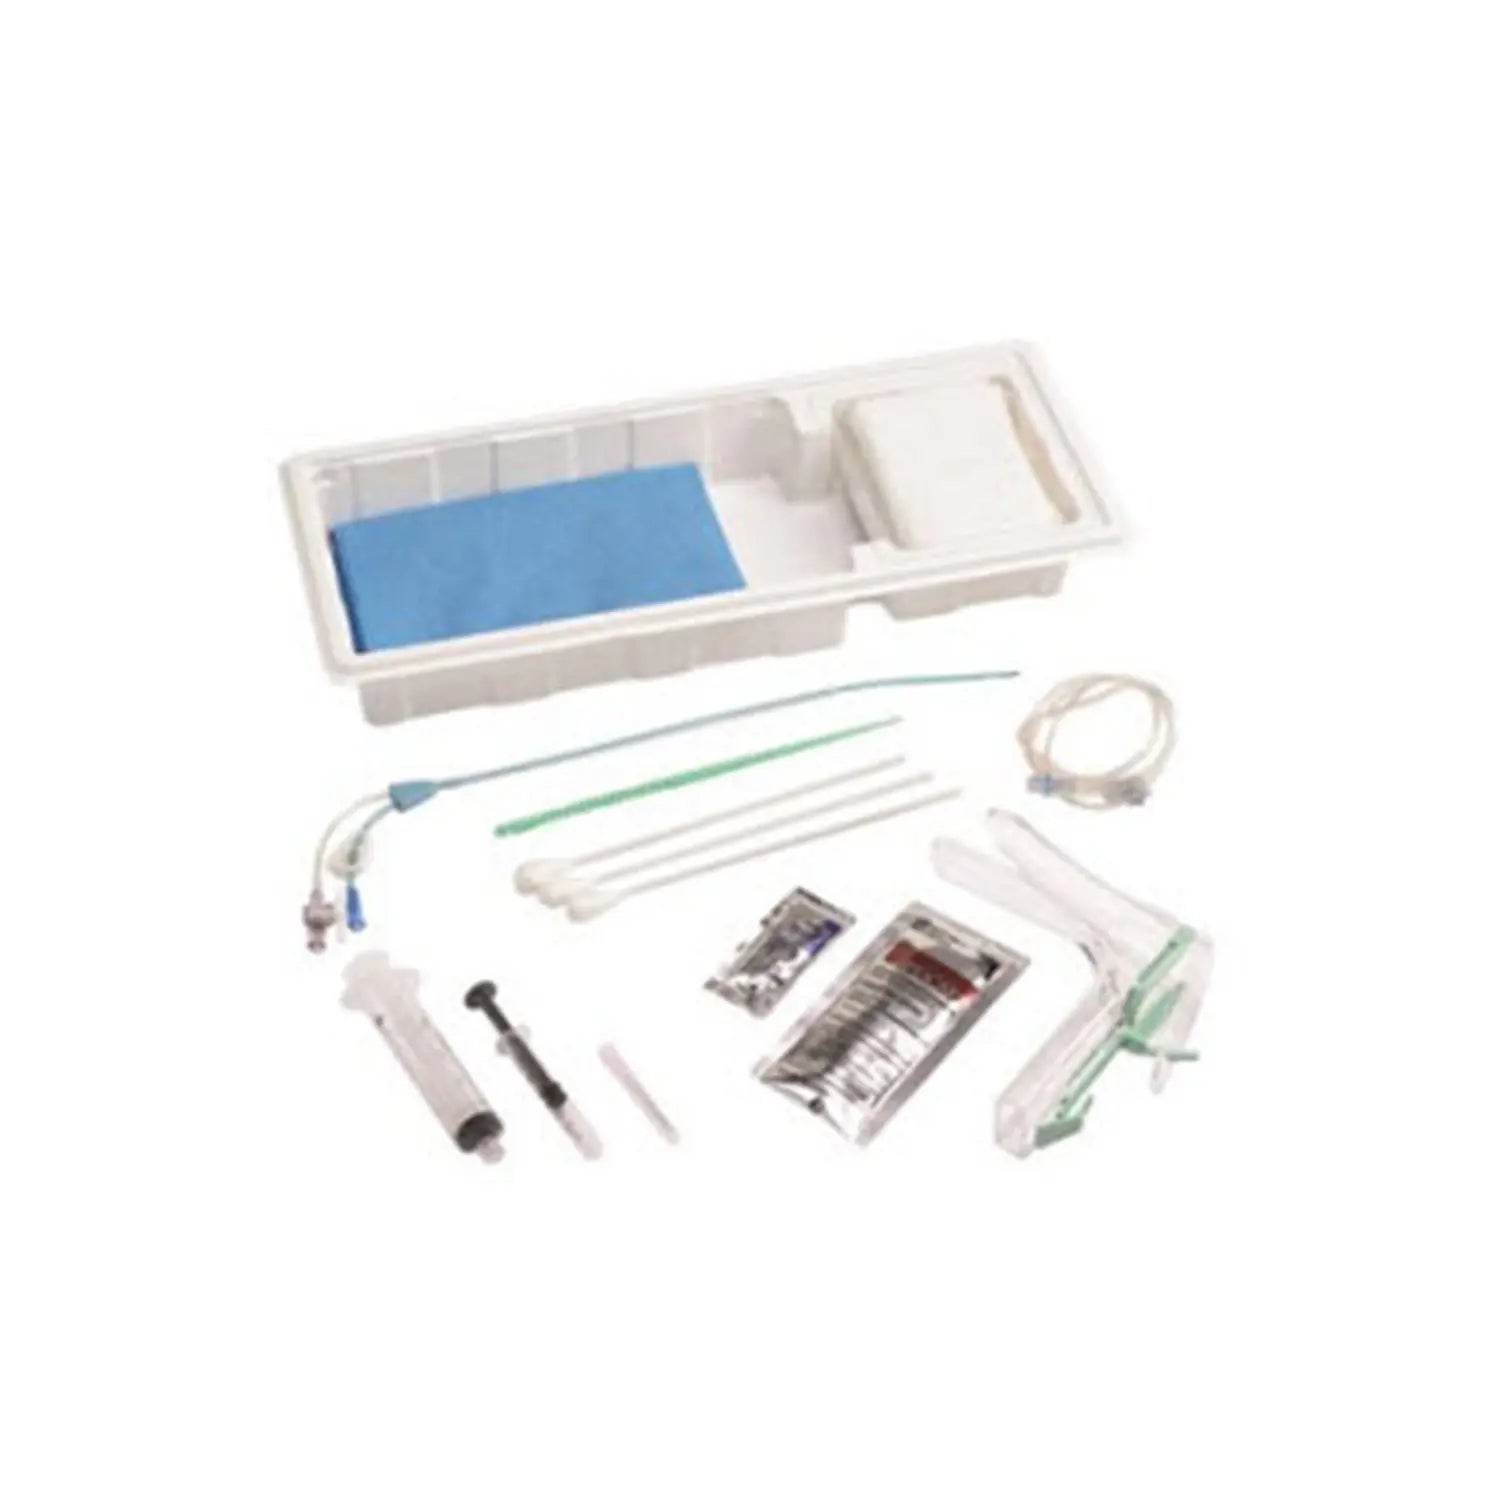 H/S Procedure Tray For Visualization of Uterine Pathology